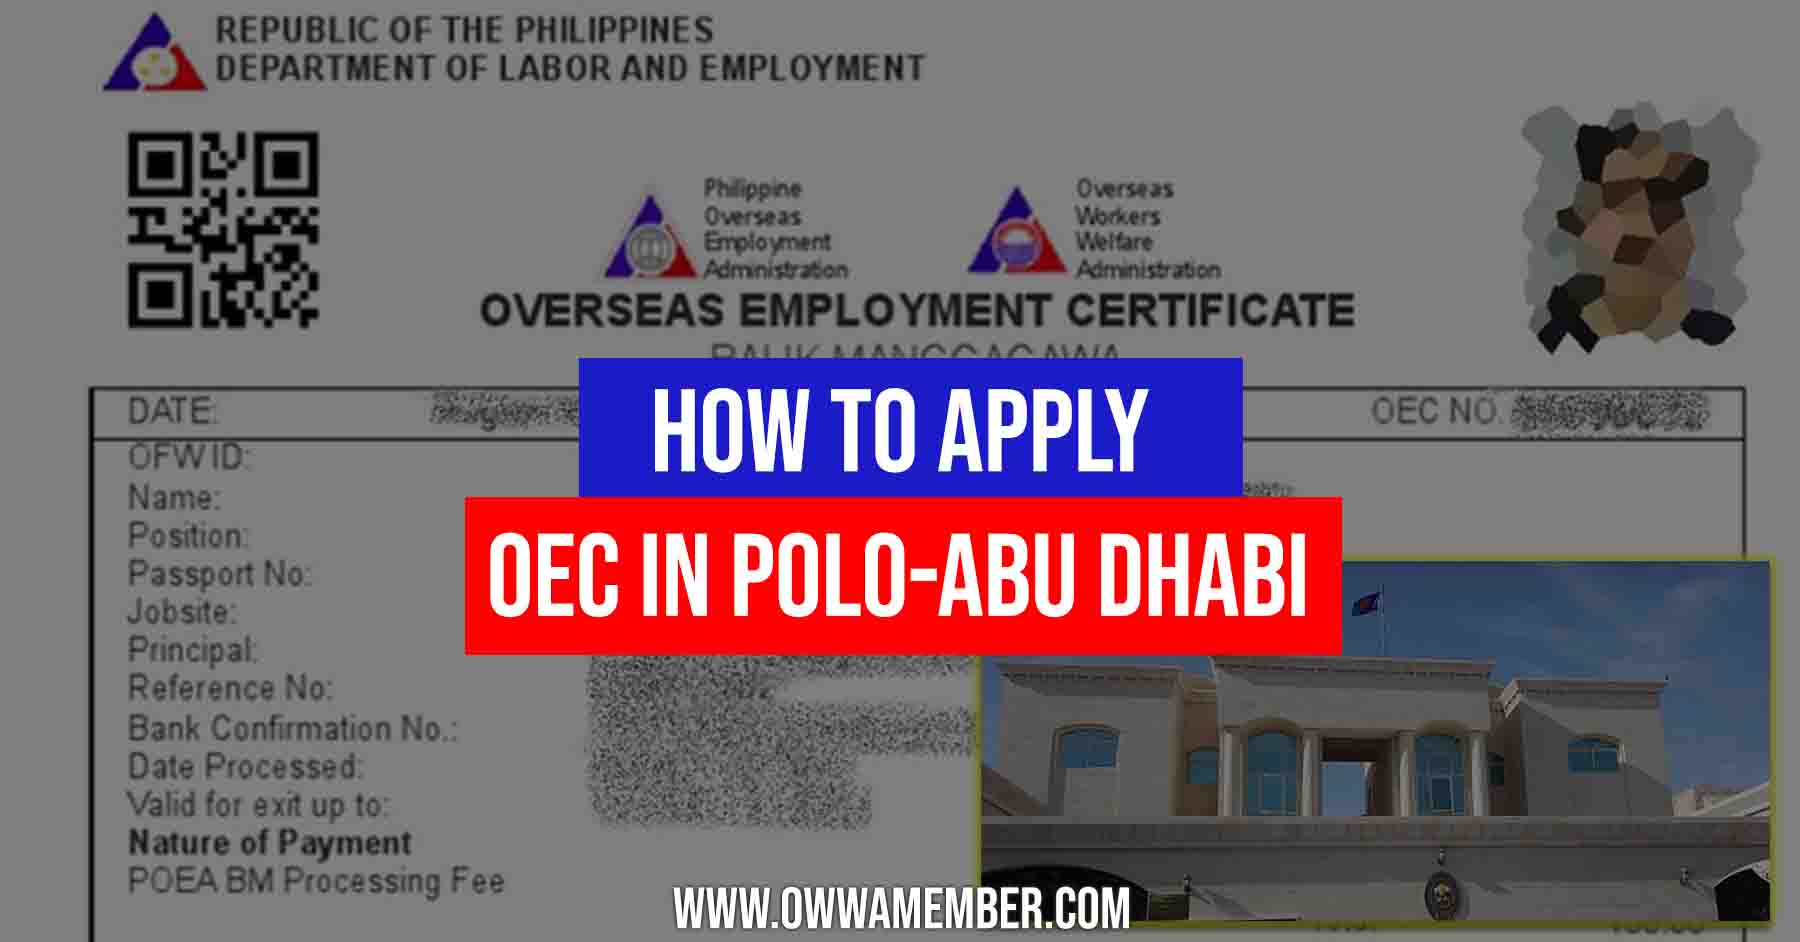 how to apply for oec in polo abu dhabi